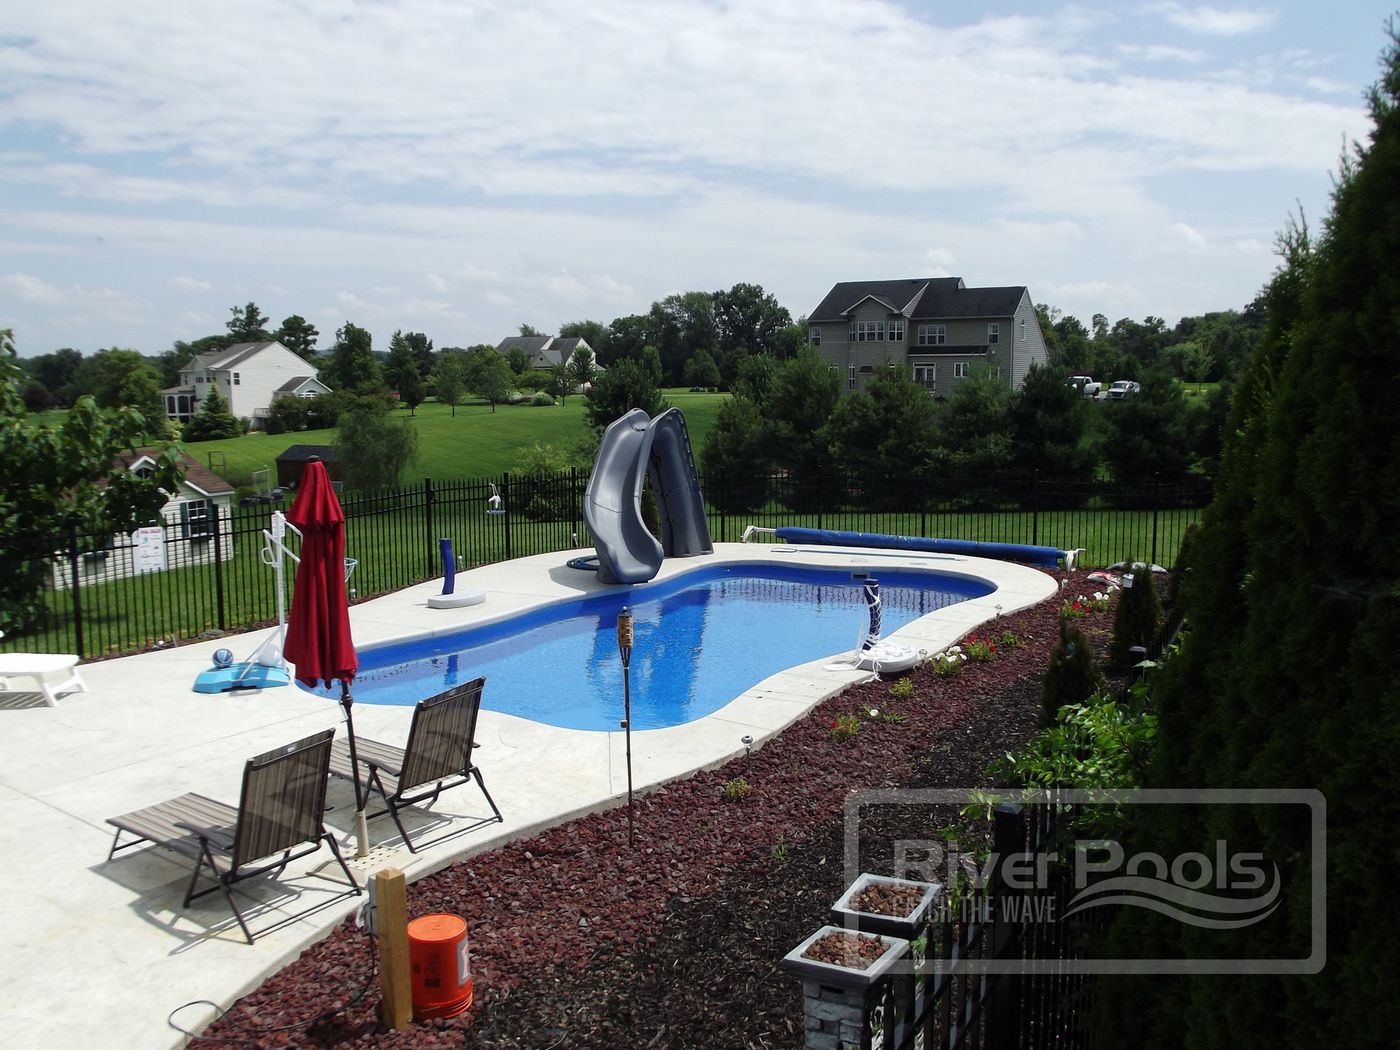 Pool Slides: 4 Things You Need to Know!